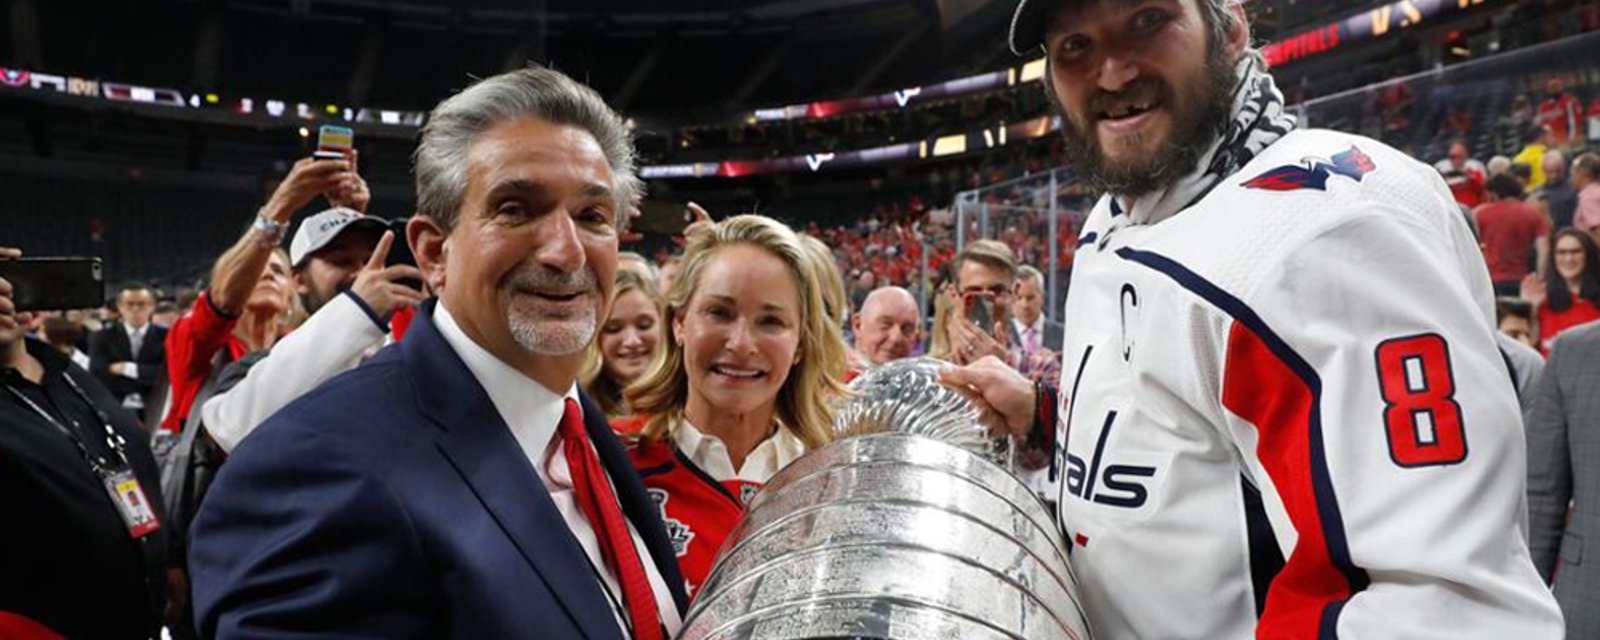 Washington Capitals owner Ted Leonsis issues bold goal 